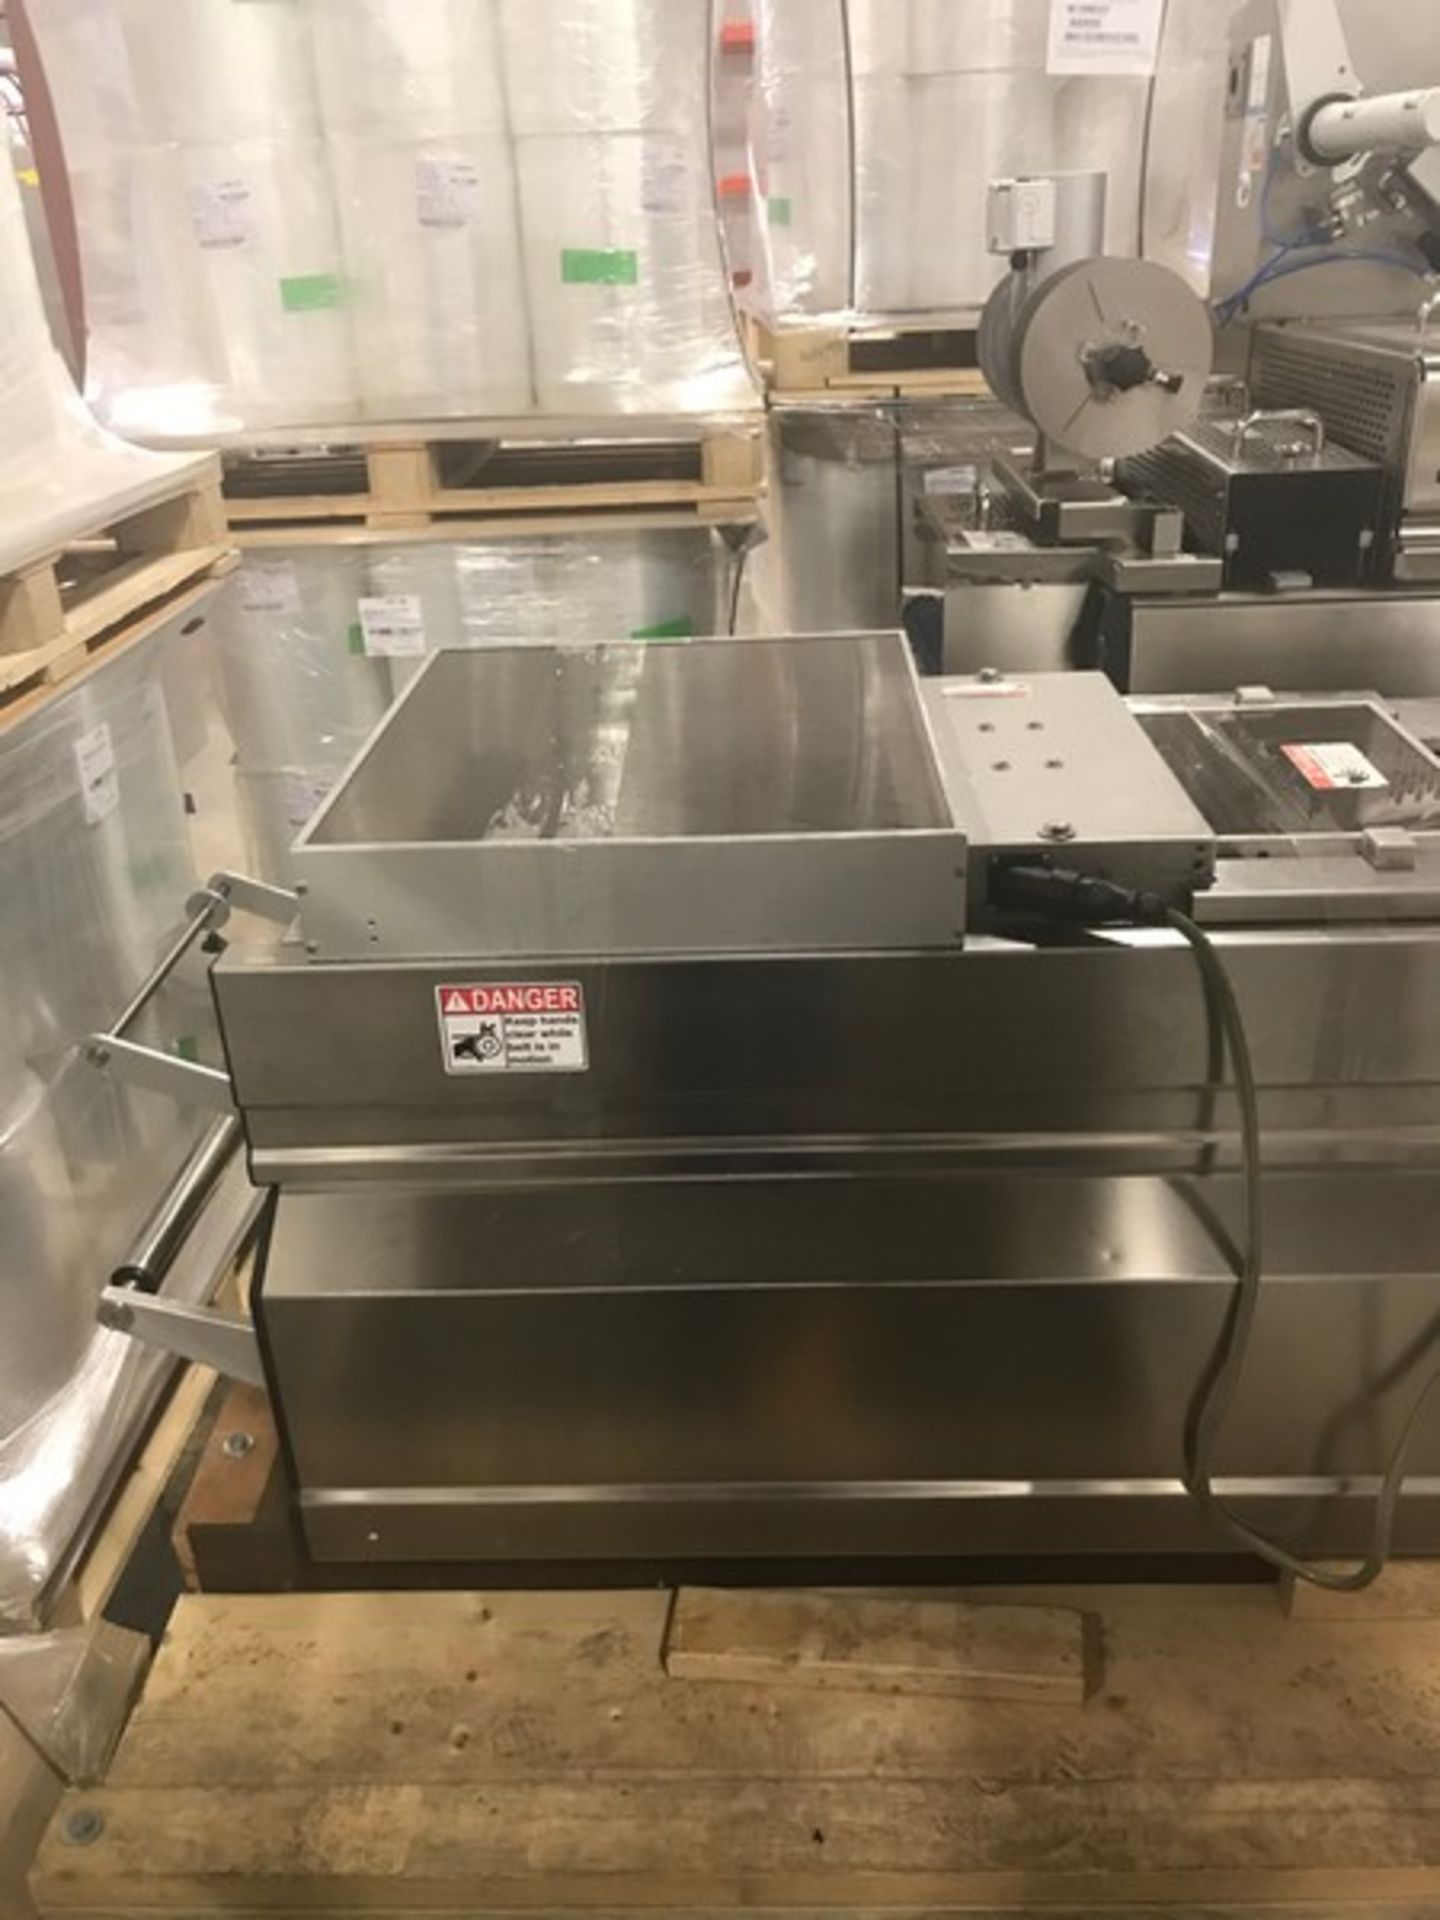 Multivac Vacuum Packaging Machine, Model R230, S/N 810, 220 V/60 Hz (1999) (Unit #96) (Located New - Image 5 of 7